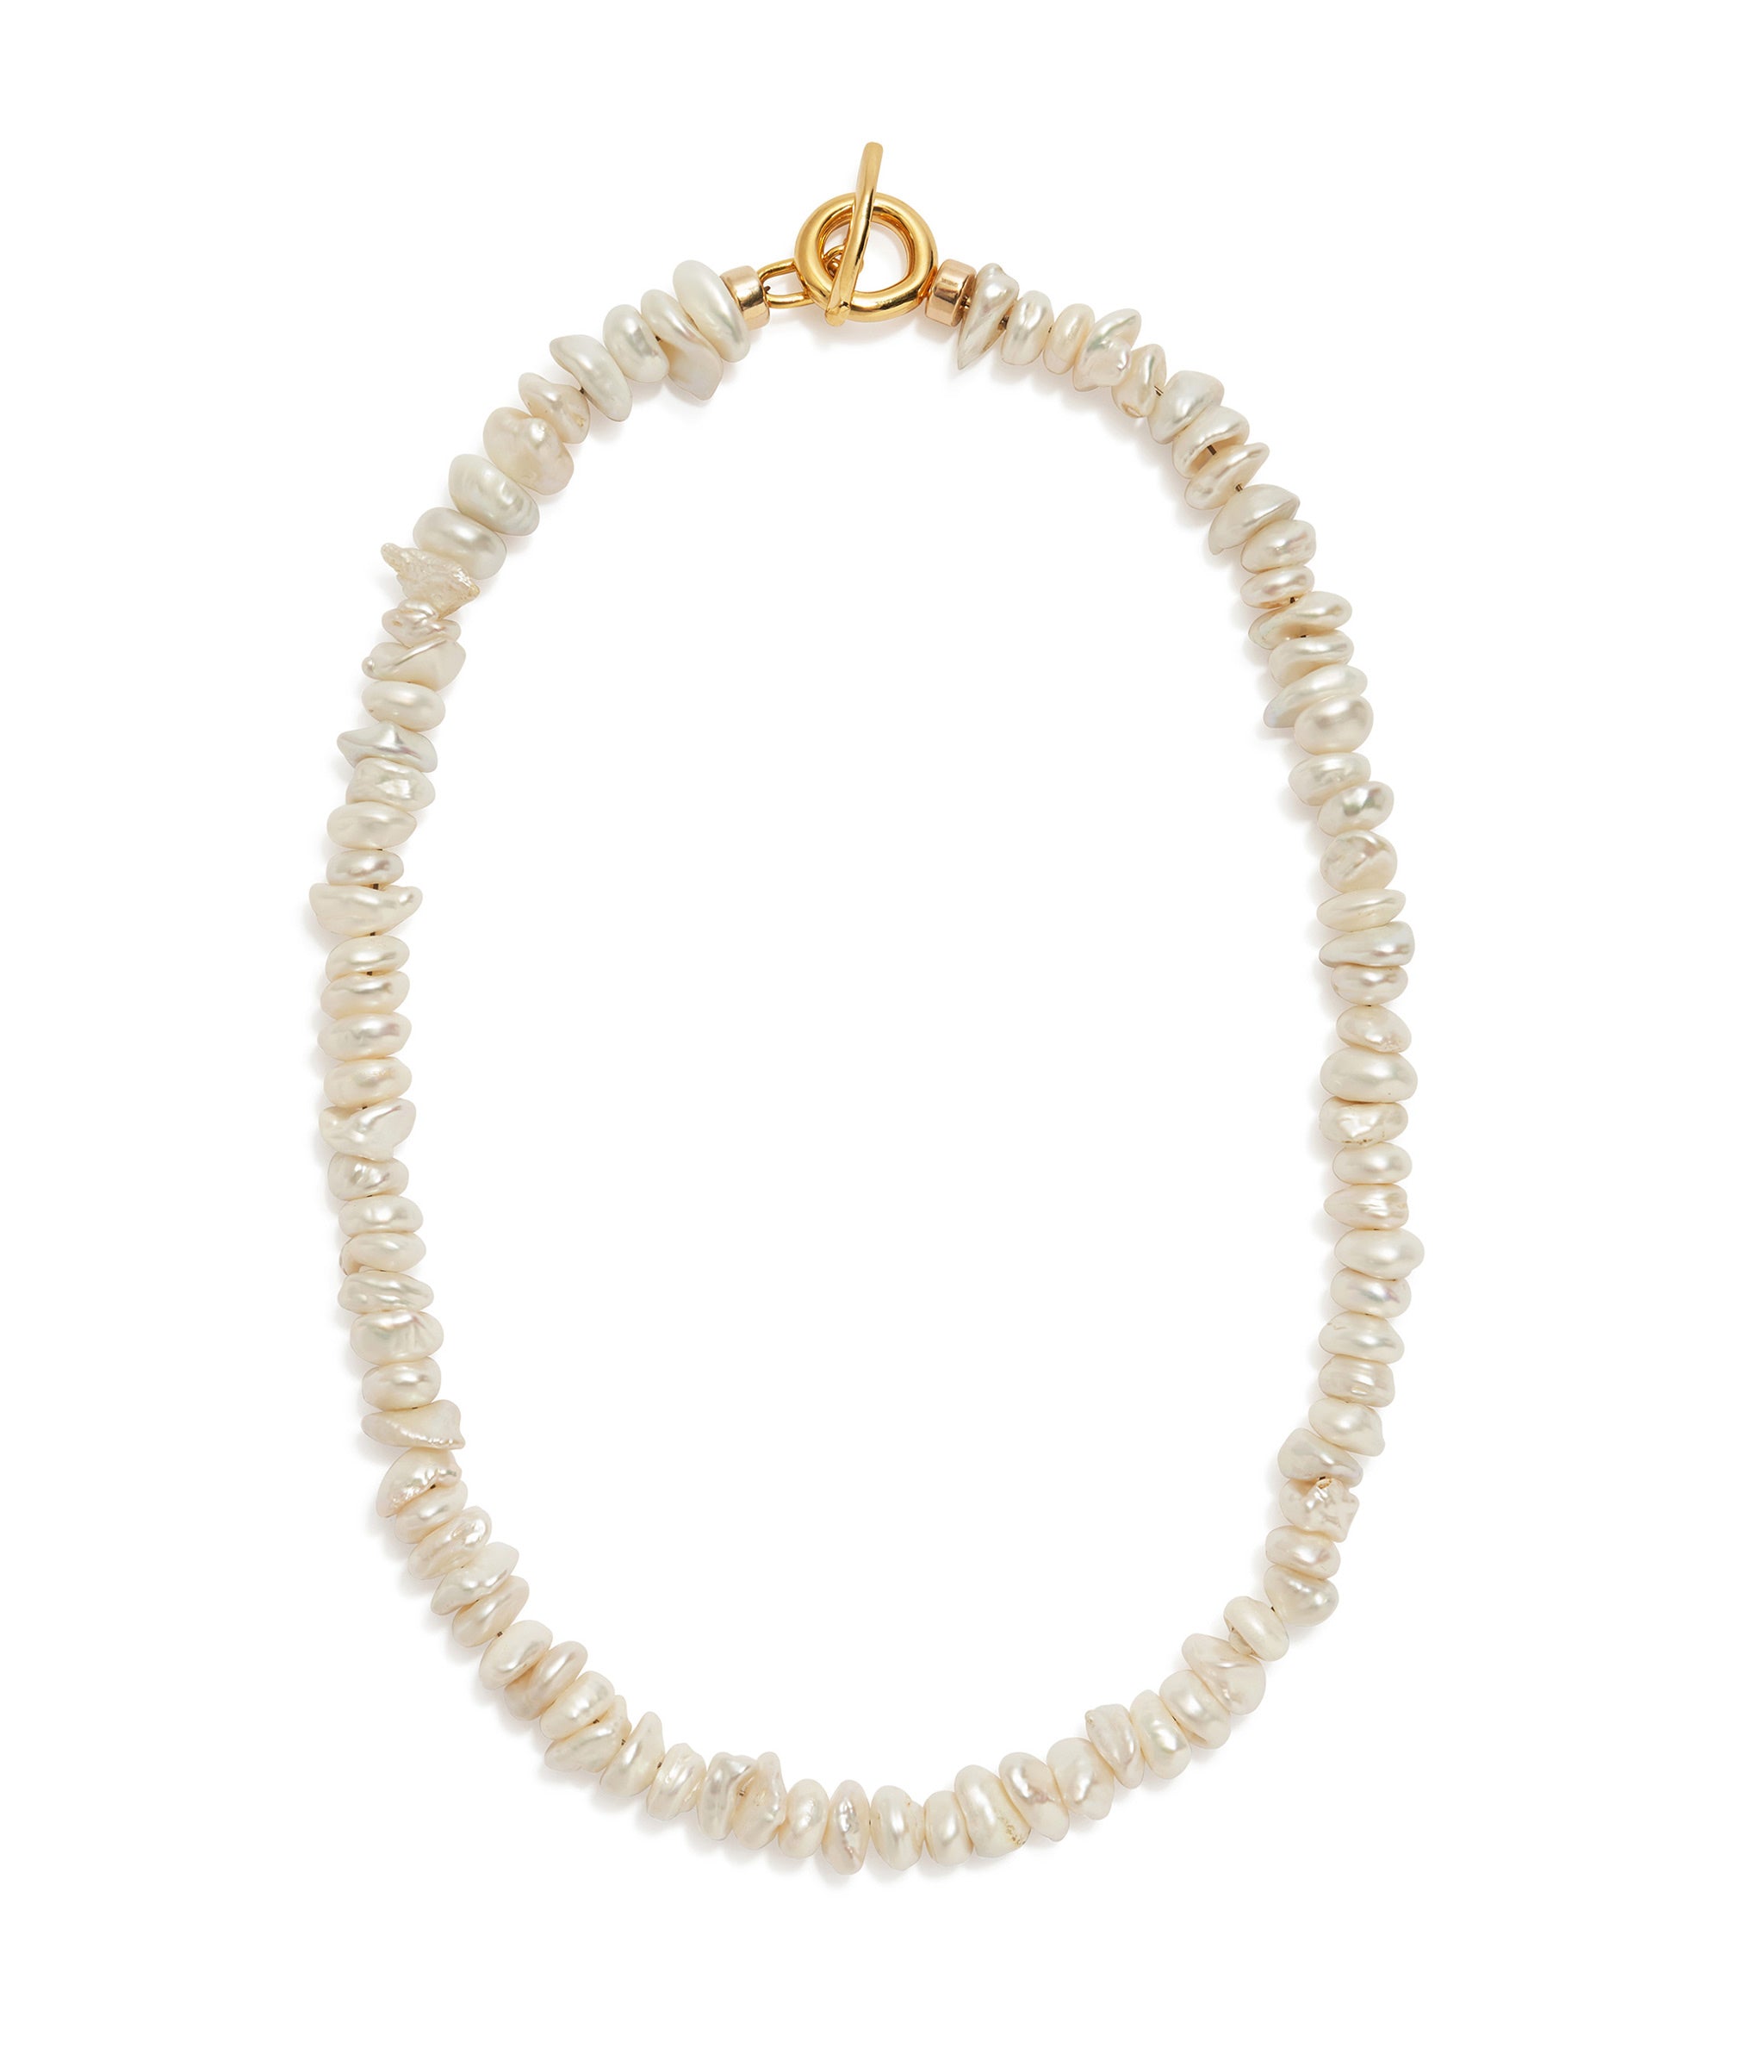 Mood Necklace in Pearl. Single-strand of keshi pearls with gold-plated brass toggle closure.